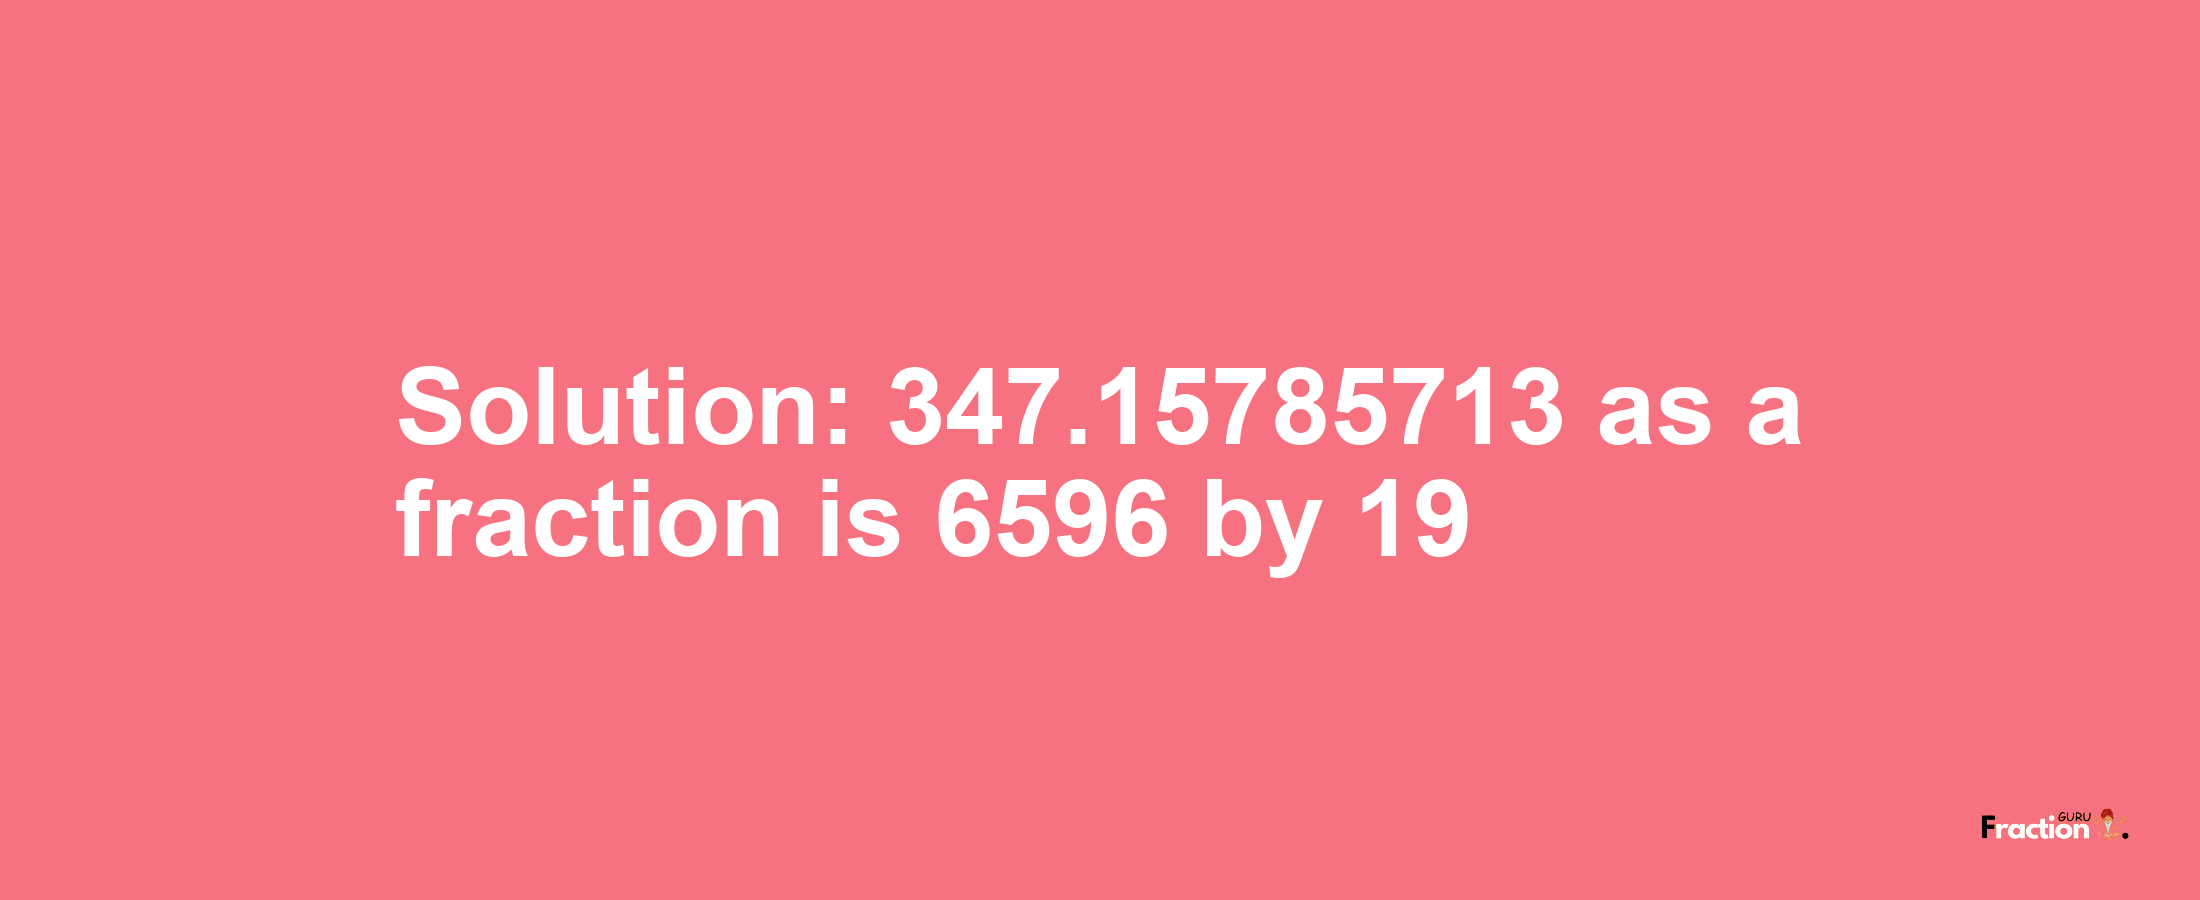 Solution:347.15785713 as a fraction is 6596/19